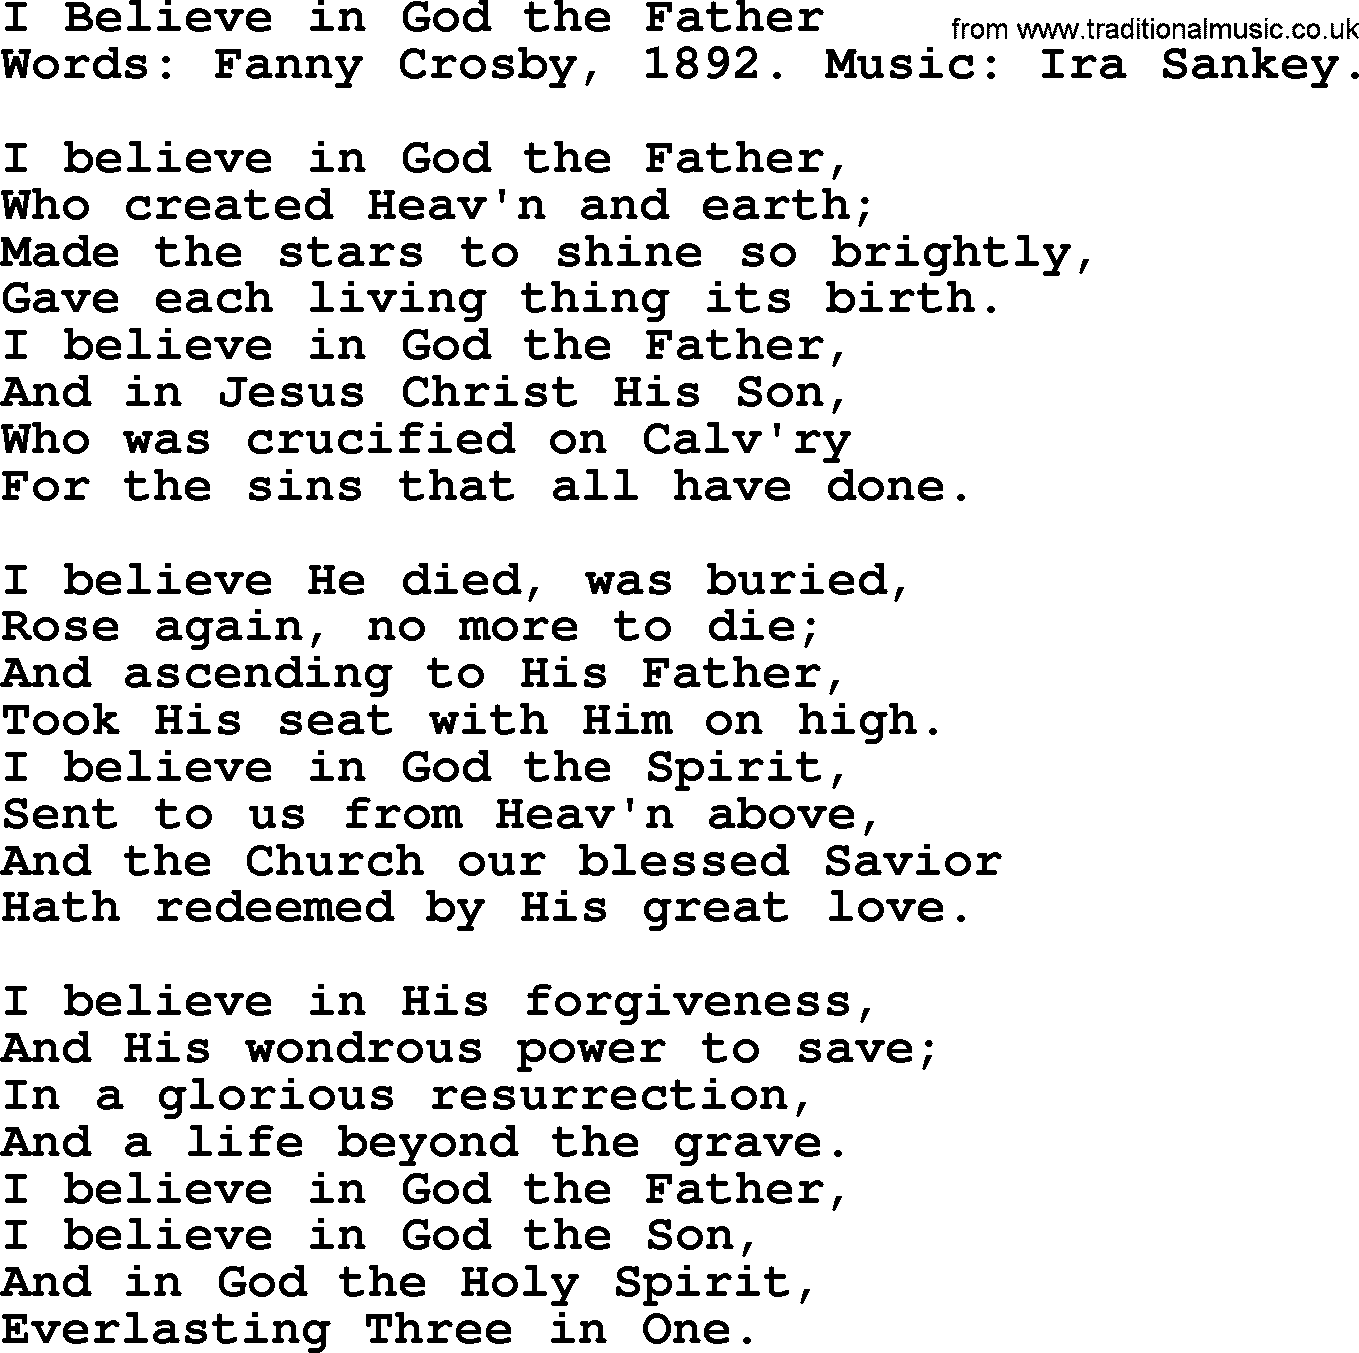 Fanny Crosby song: I Believe In God The Father, lyrics